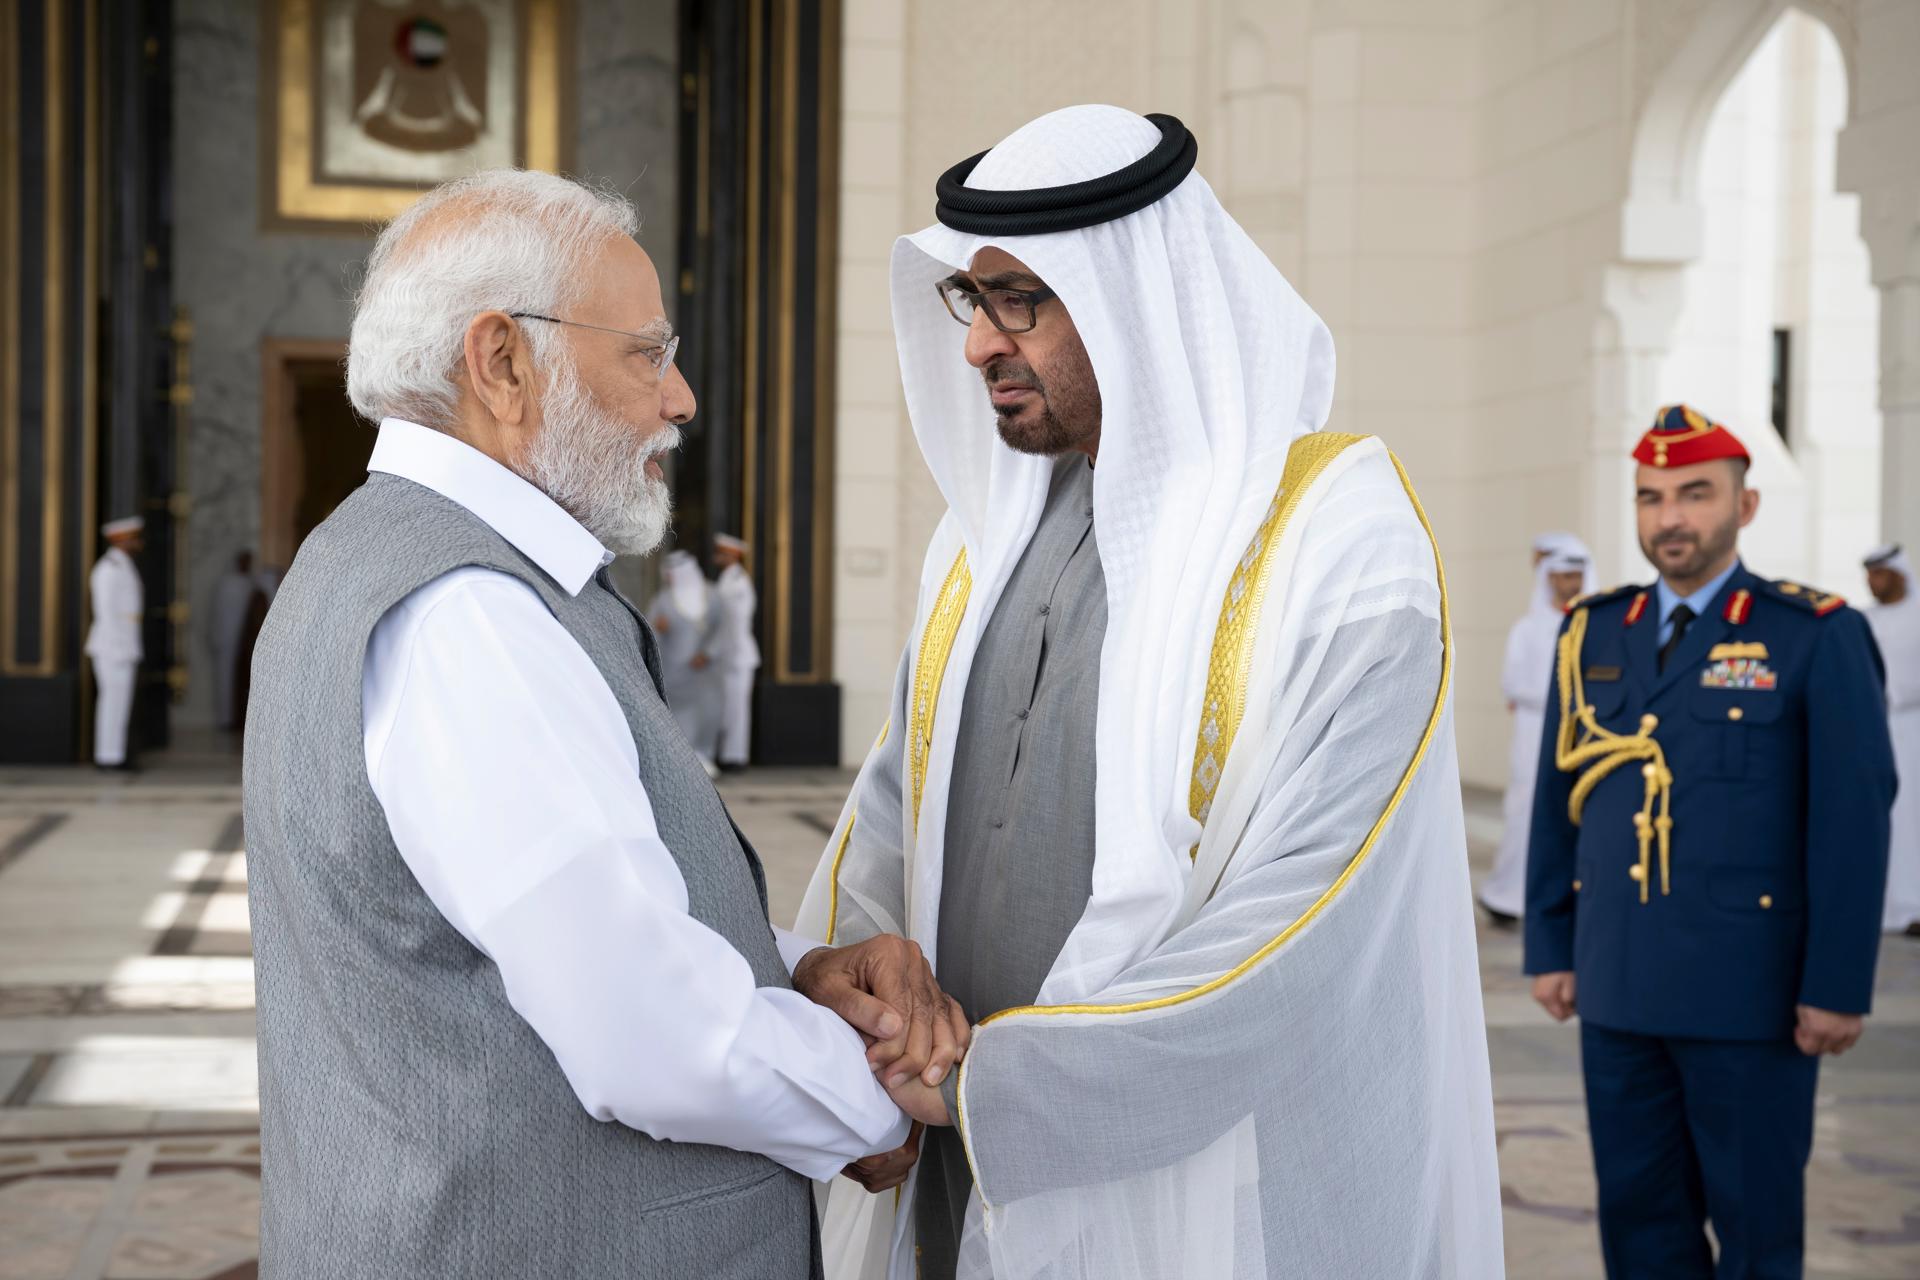 A handout photo made available by the UAE's Presidential Court shows President of the United Arab Emirates and Ruler of the emirate of Abu Dhabi Sheikh Mohamed bin Zayed Al Nahyan (R) meeting with Indian Prime Minister Narendra Modi (L), in Abu Dhabi, United Arab Emirates, 15 July 2023. EFE/EPA/UAE PRESIDENTIAL COURT HANDOUT HANDOUT EDITORIAL USE ONLY/NO SALES